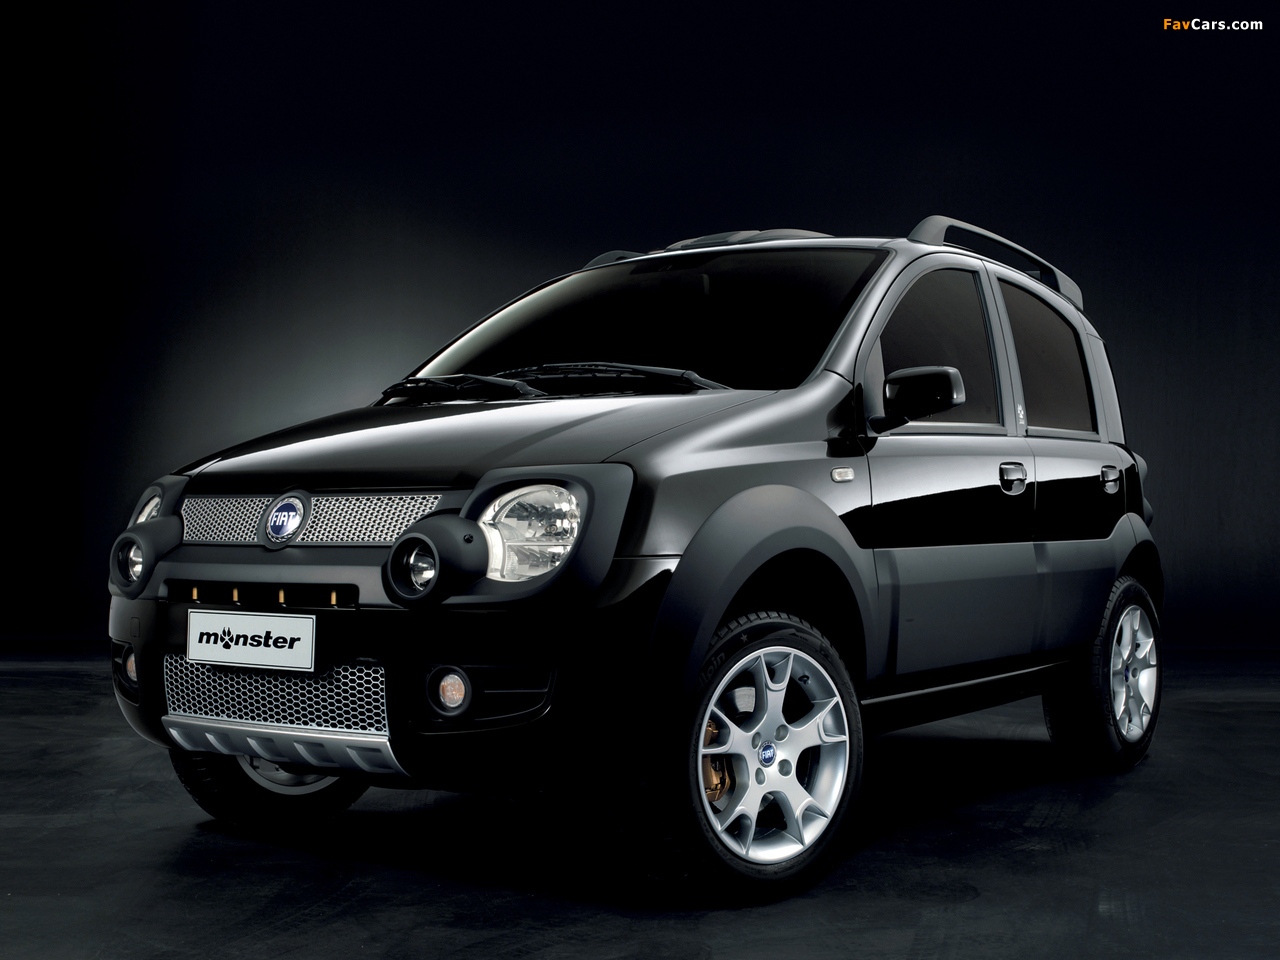 Fiat Panda 4x4 Monster (169) 2006 pictures (1280 x 960)